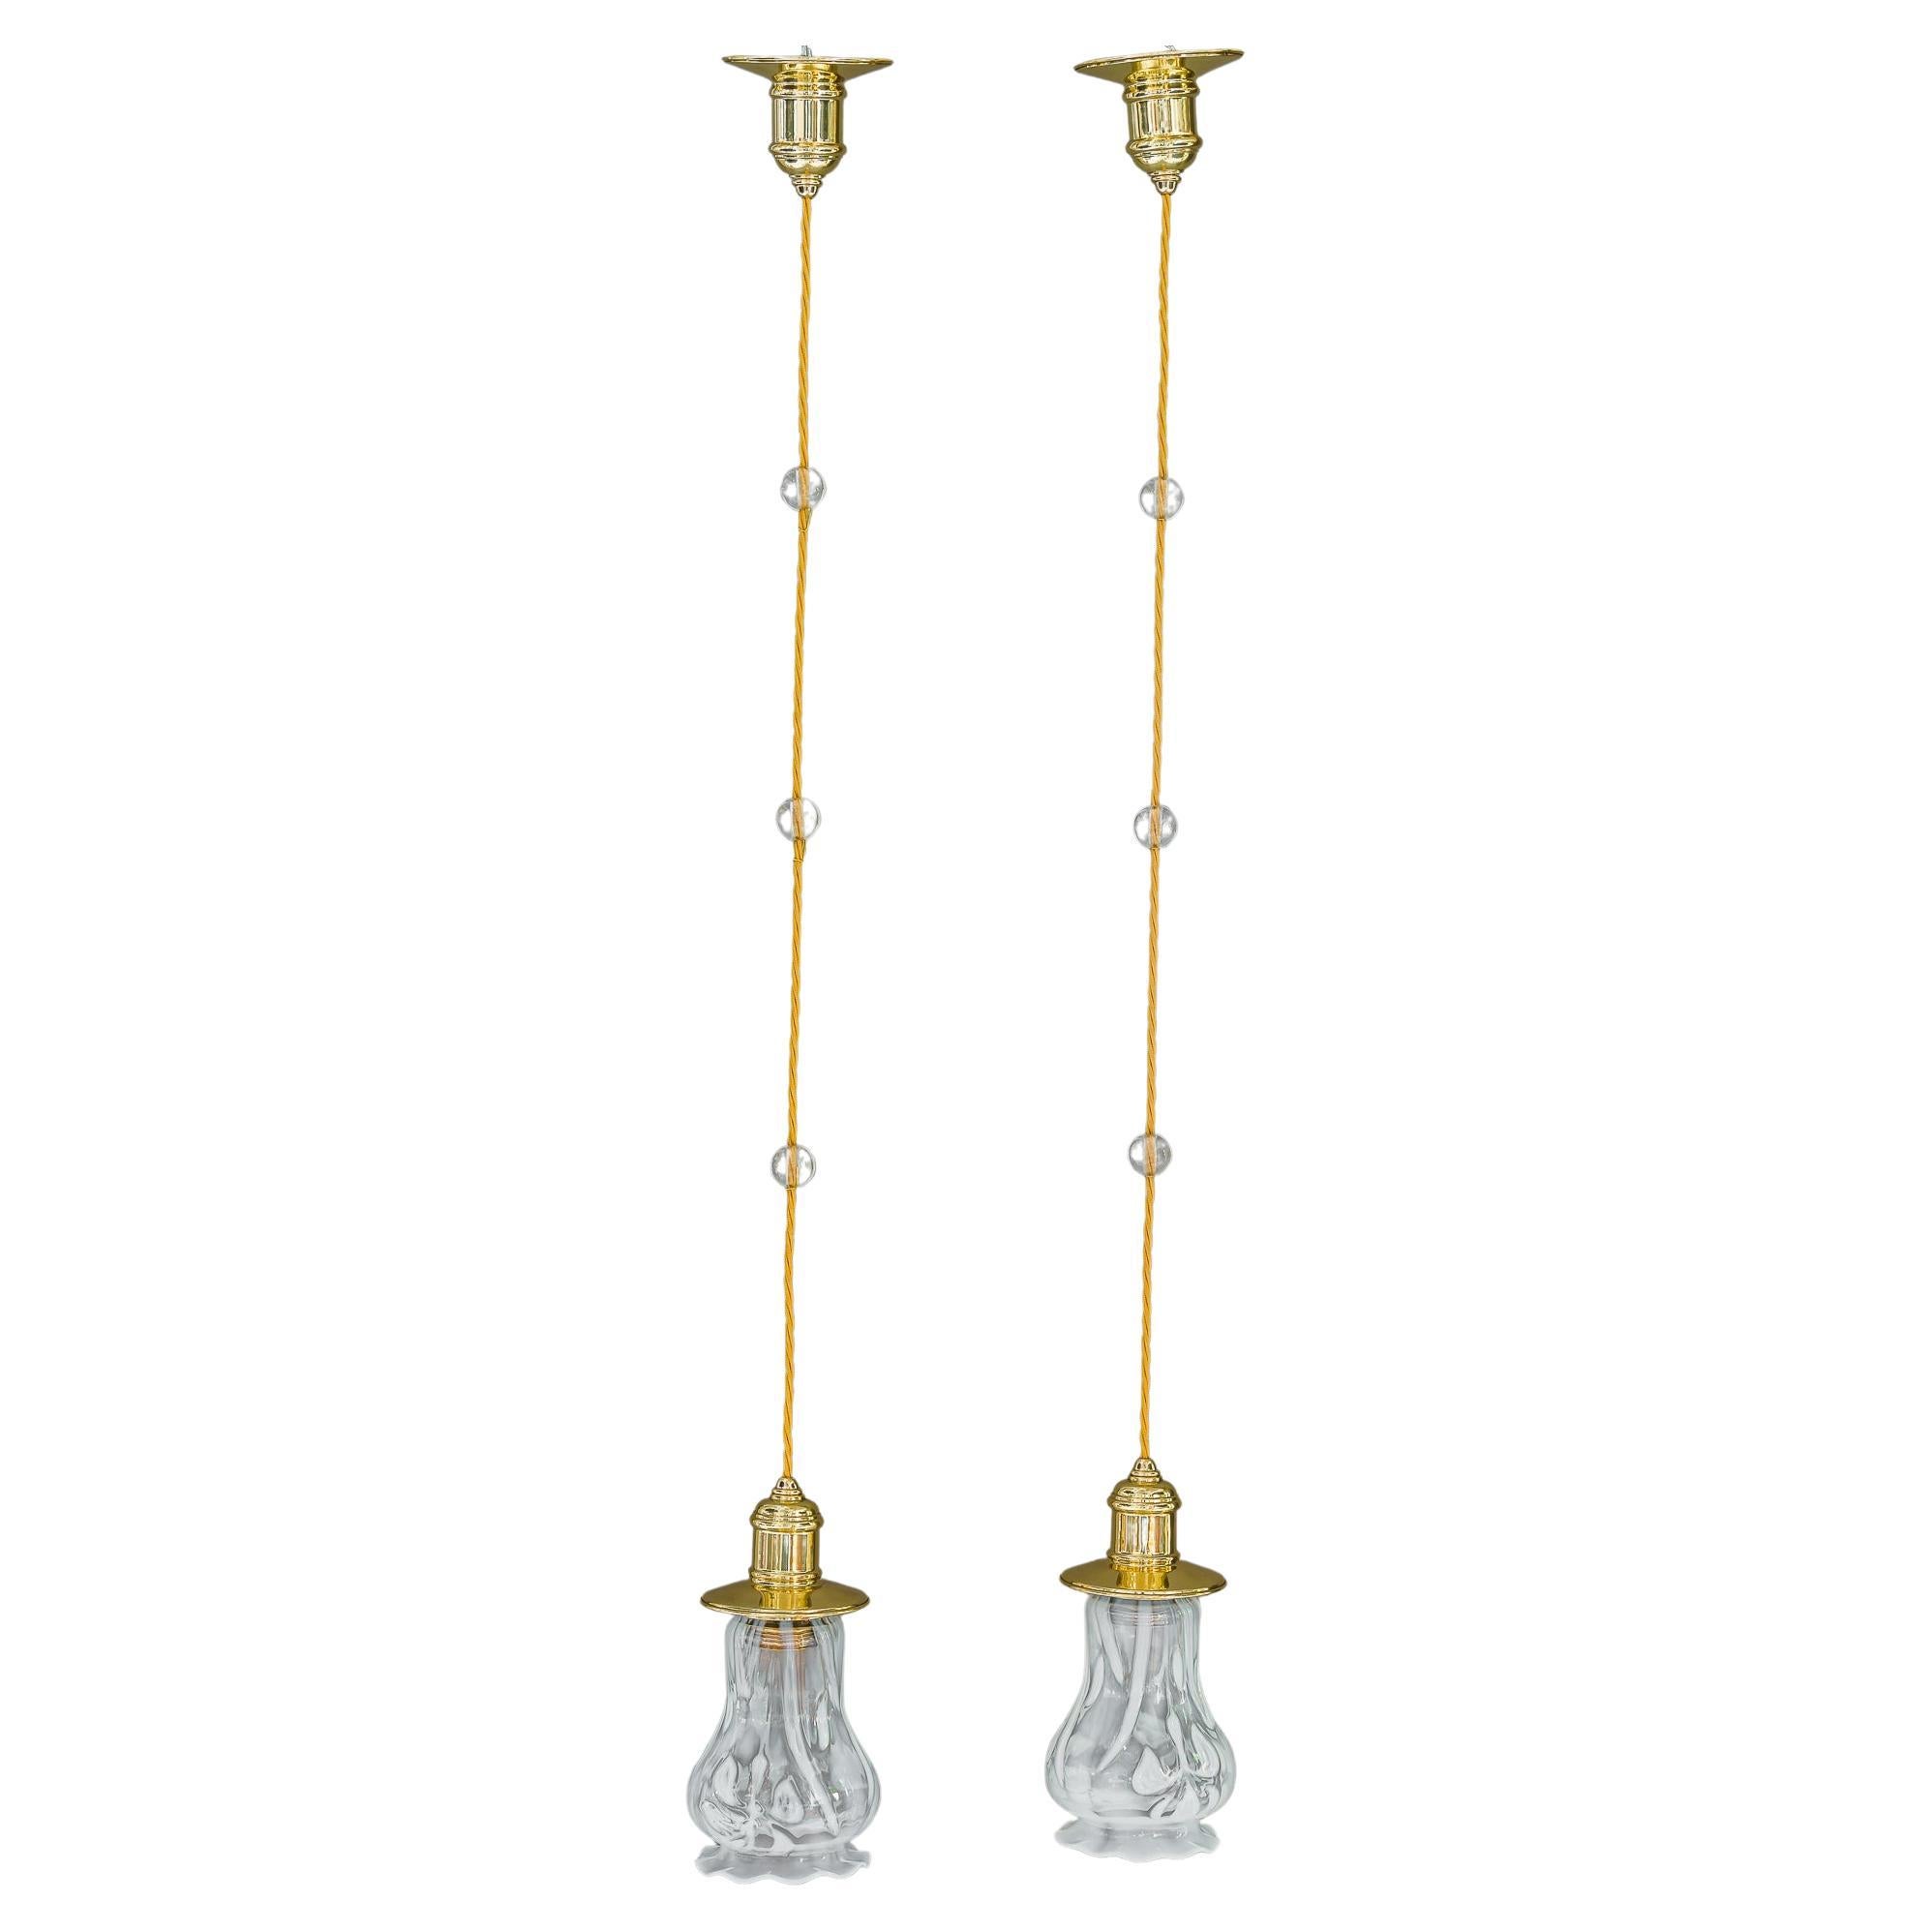 2 Art Deco Pendants Vienna Around 1920s with Opaline Glass Shades For Sale